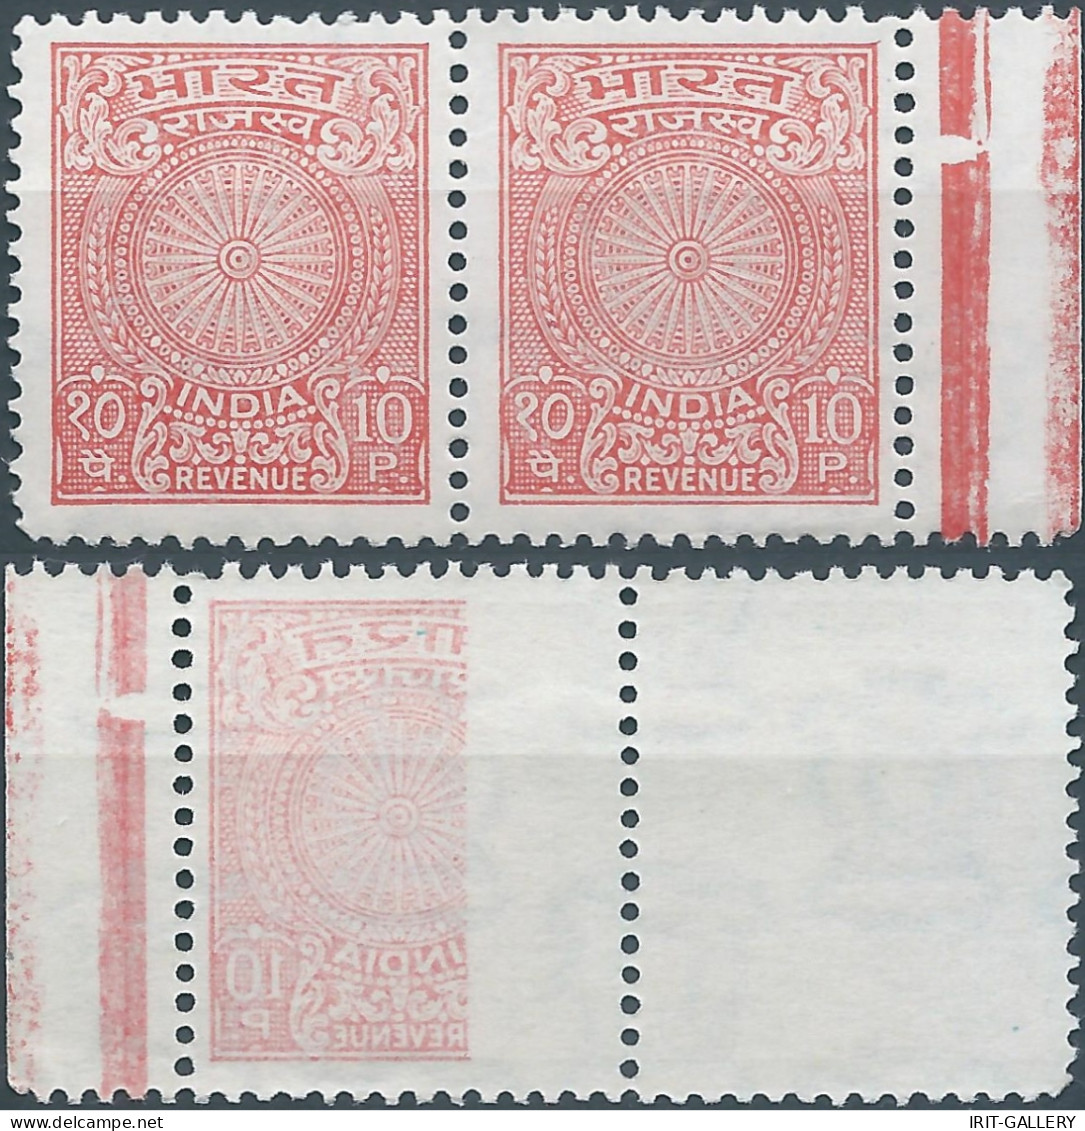 INDIA - INDIAN,Revenue Stamps Tax Fiscal 10p In Pairs , It Is Back Printed,MNH - Francobolli Di Servizio